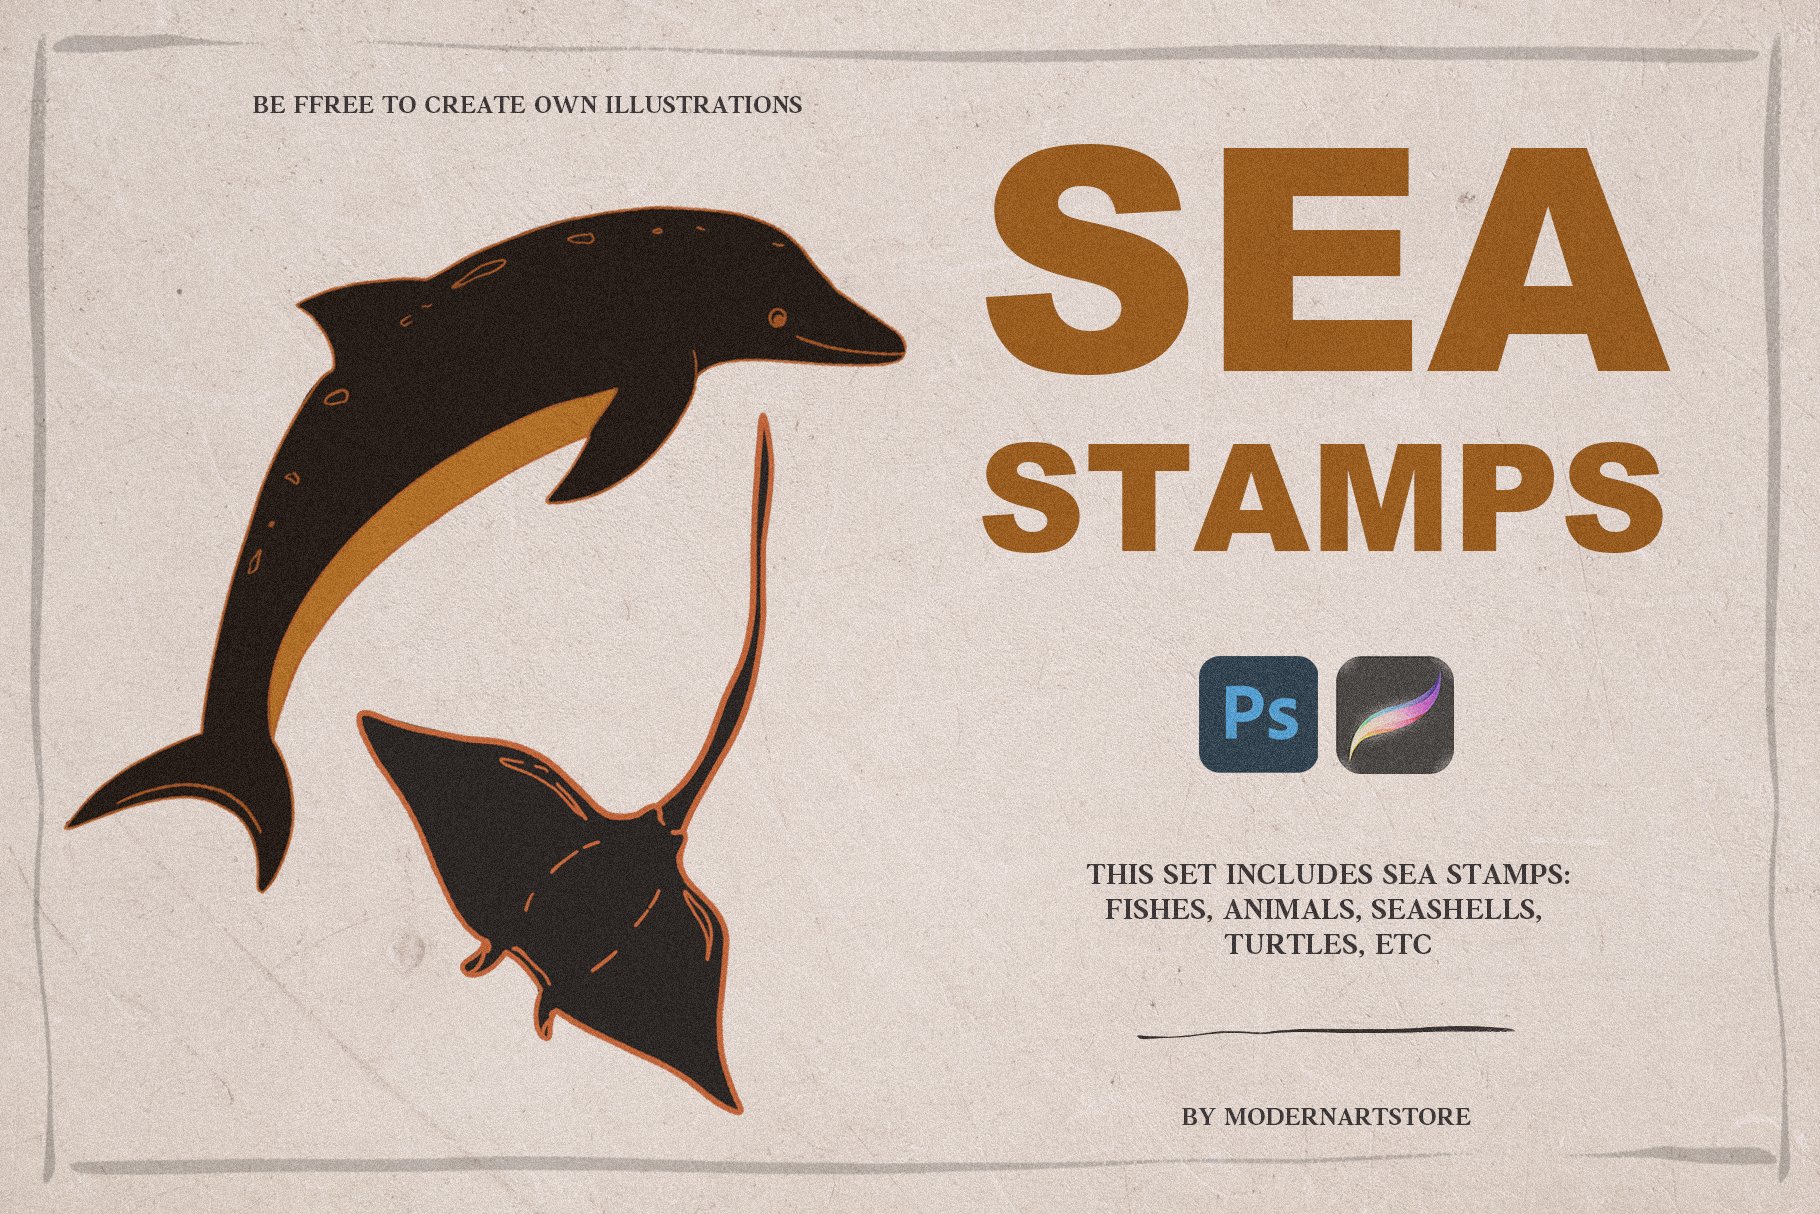 SEA STAMPS for Procreate / Photoshoppreview image.